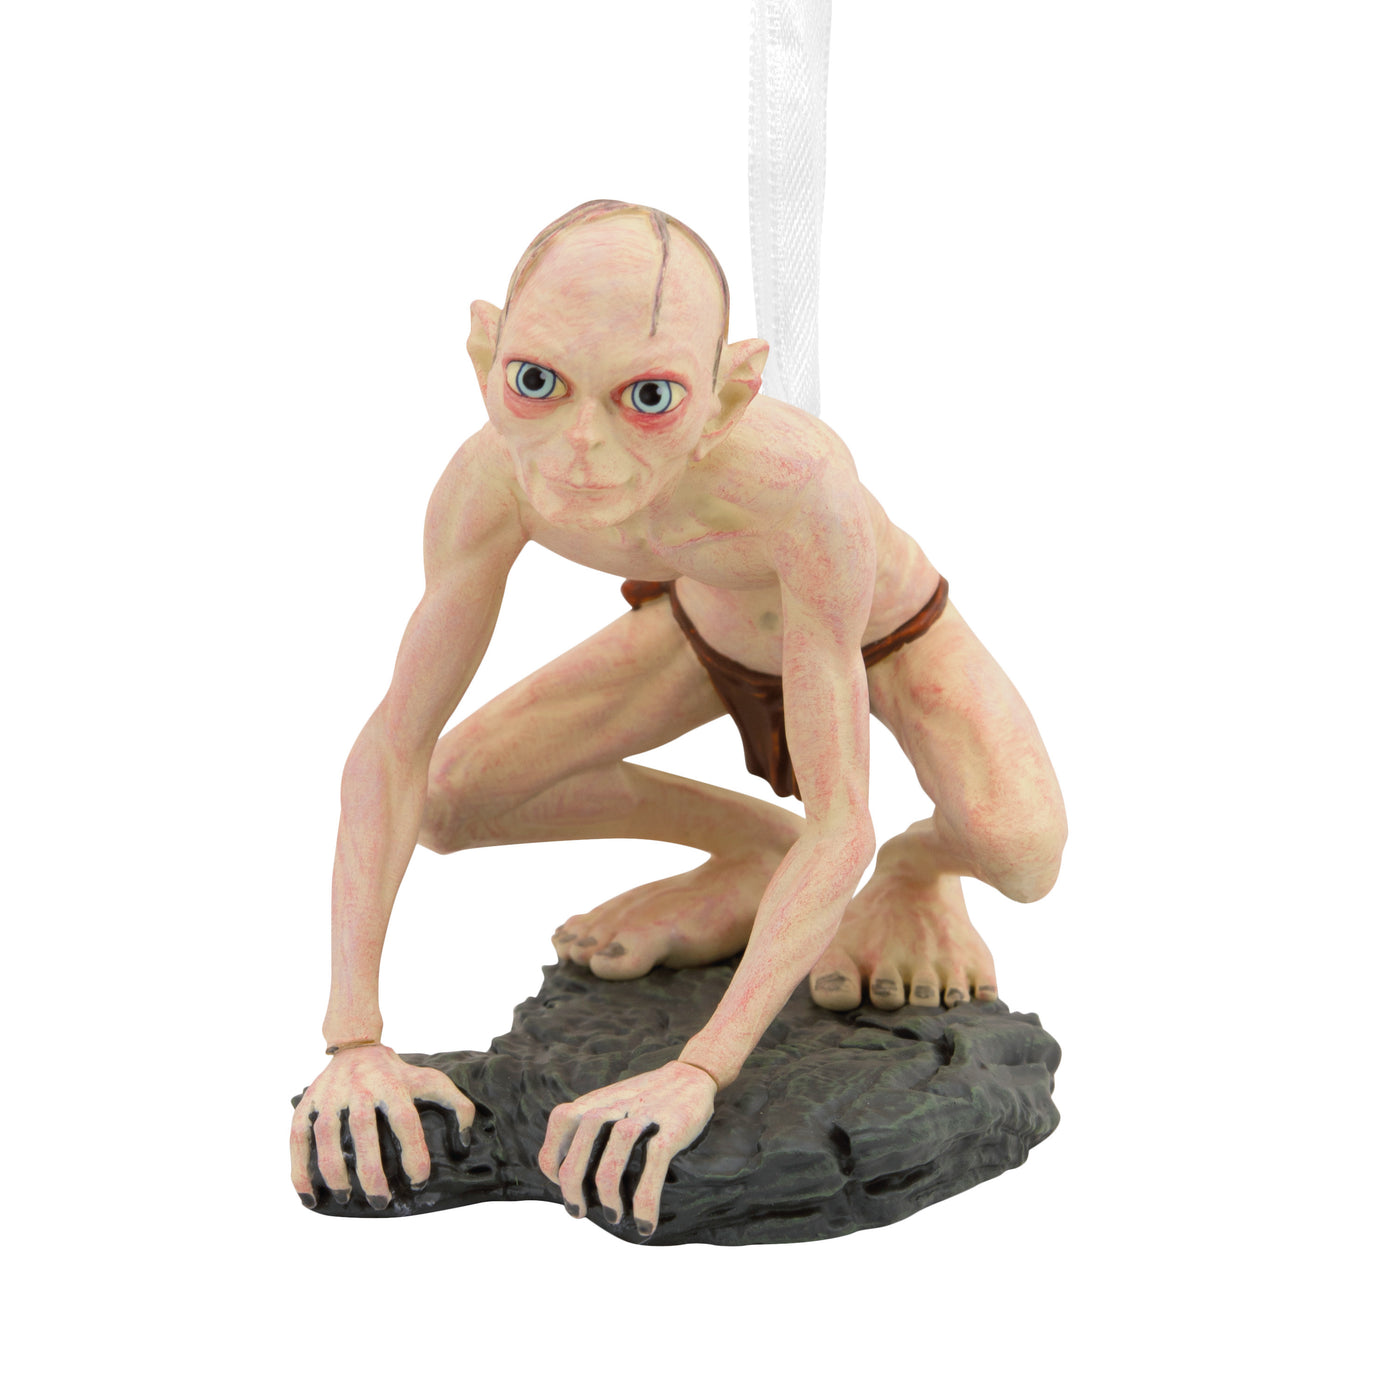 Lord of the Rings Gollum Ornament